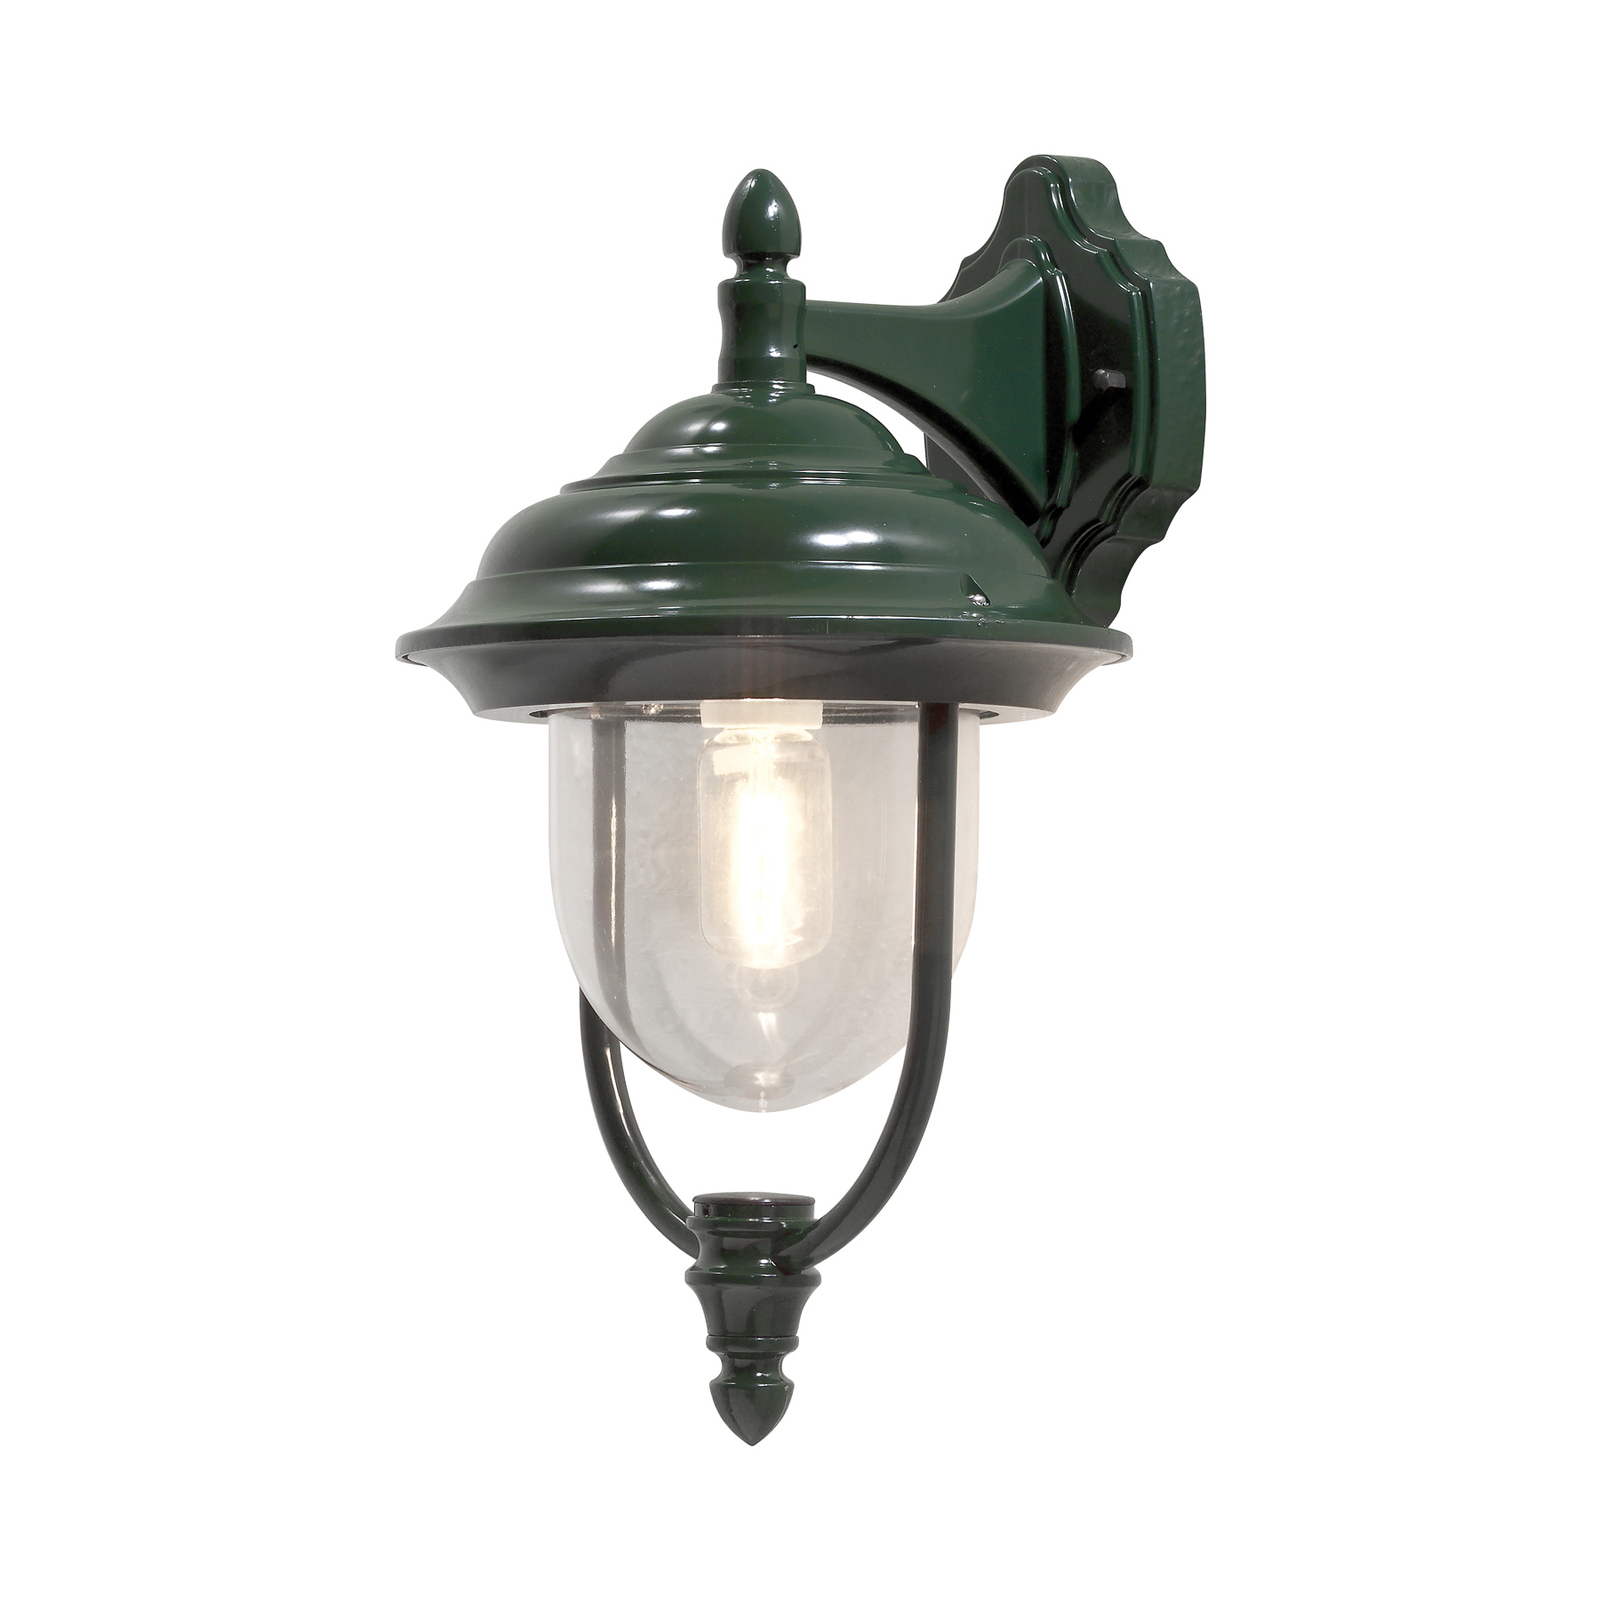 Parma outdoor wall light, hanging lantern in green